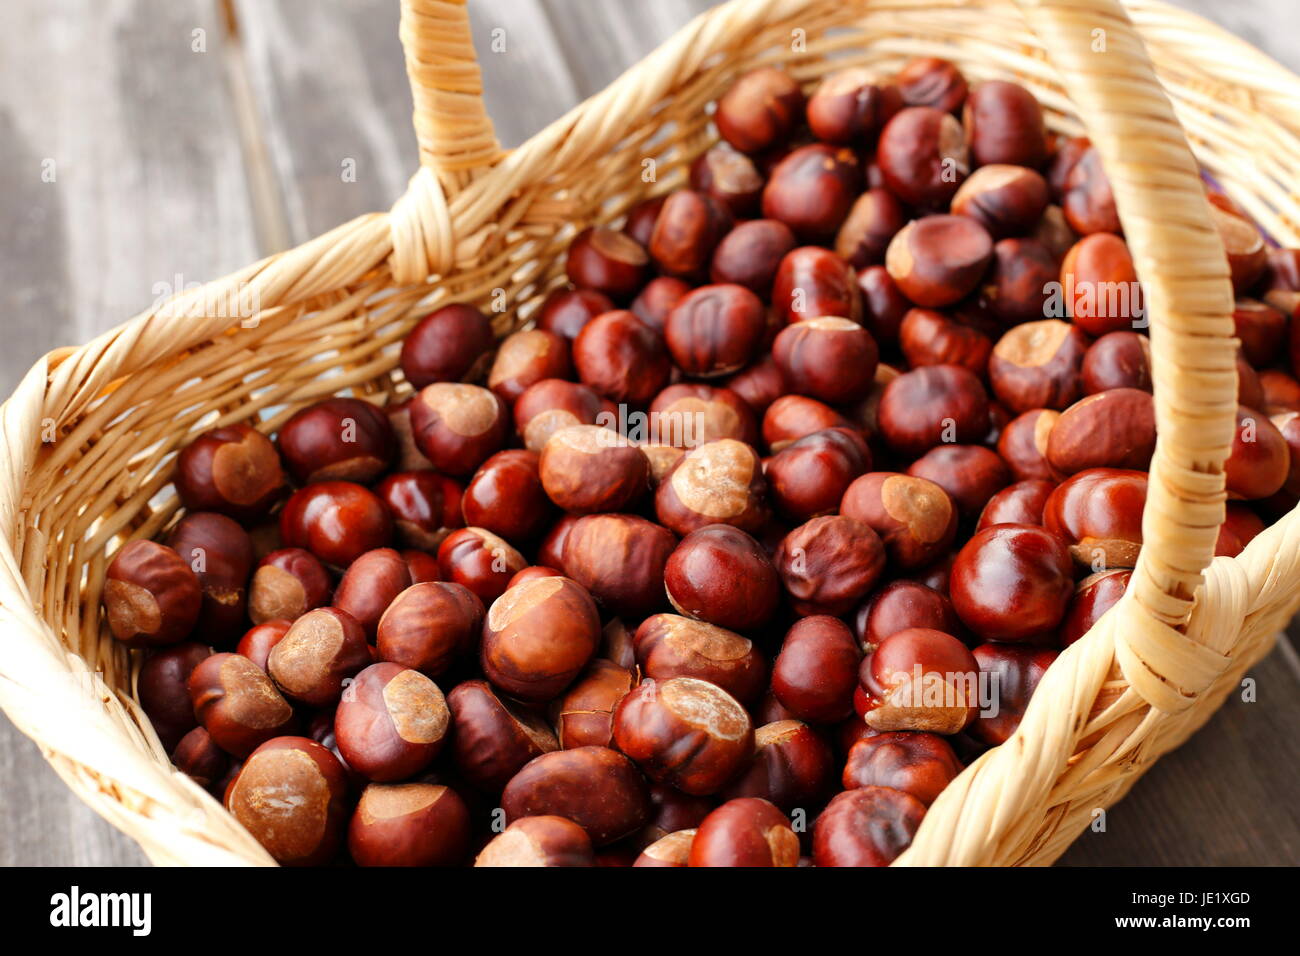 Kastanien Baum Herbst High Resolution Stock Photography and Images - Alamy